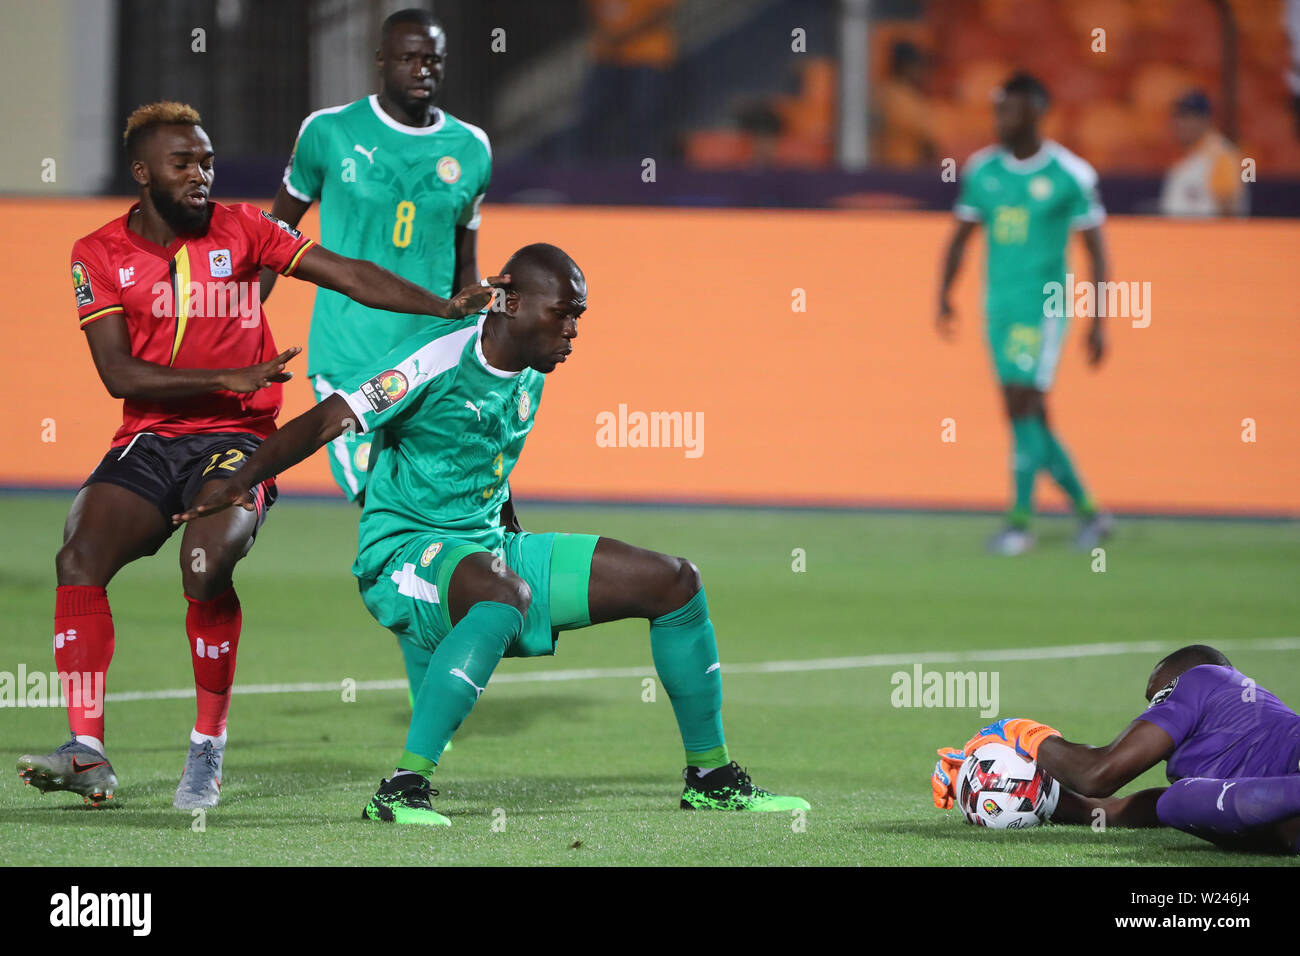 Cairo, Egypt. 05th July, 2019. Senegal's Alfred Gomis (R) catches the ball before Uganda's Lumala Abdu (L) during the 2019 Africa Cup of Nations round of 16 soccer match between Uganda and Senegal at Cairo International Stadium. Credit: Gehad Hamdy/dpa/Alamy Live News Stock Photo